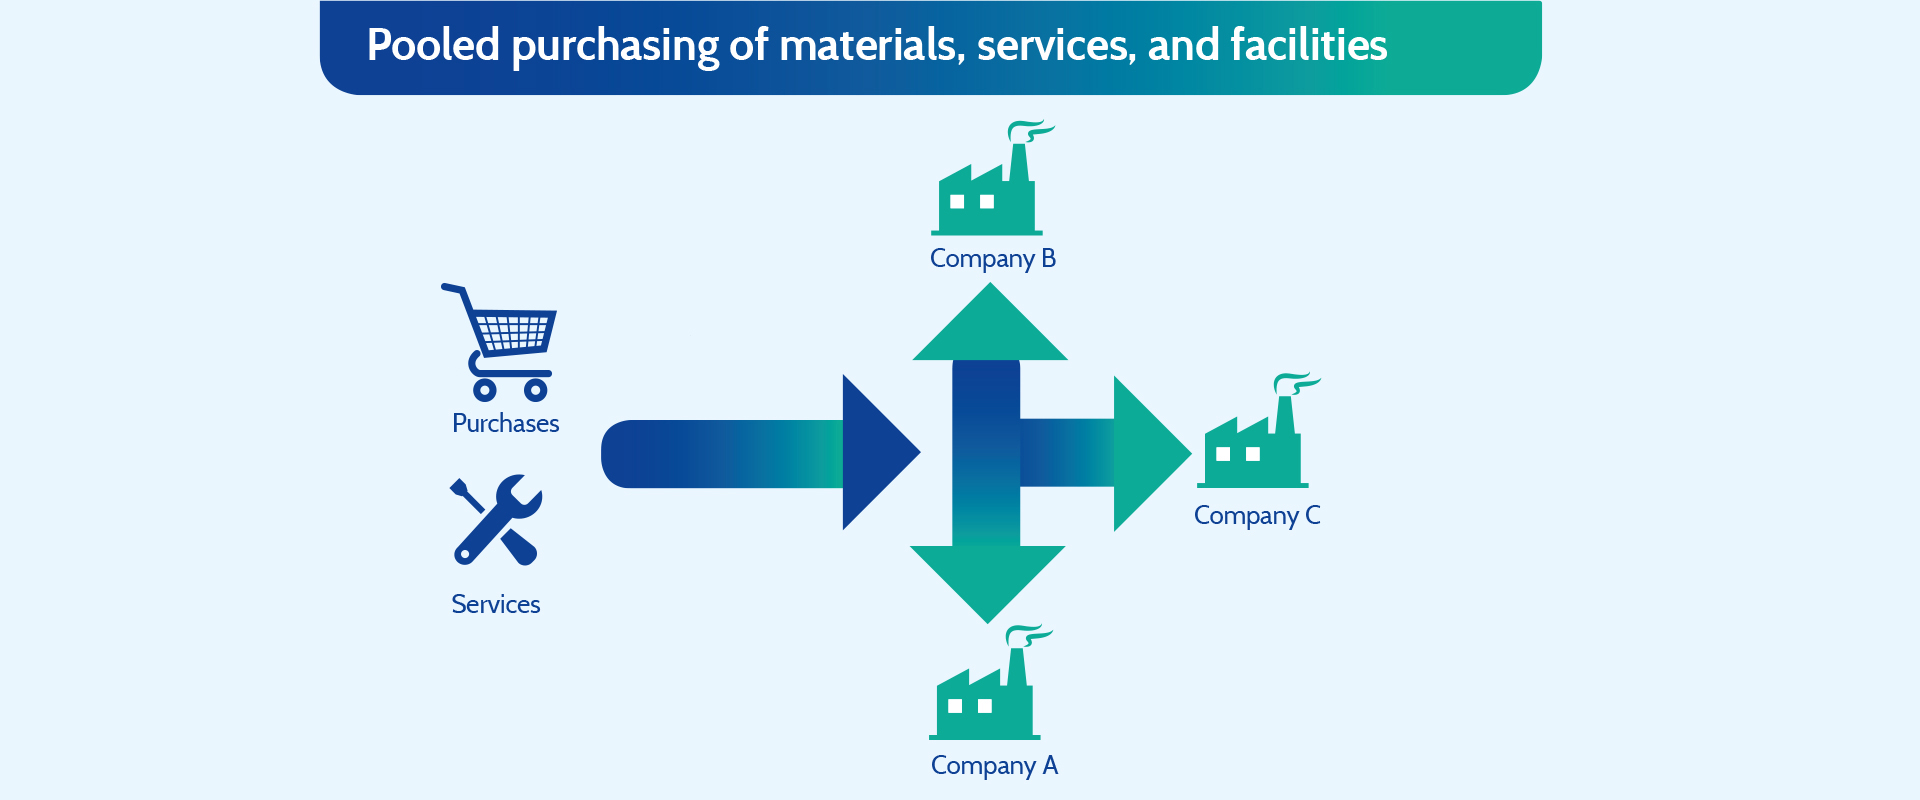 Pooled purchasing of materials, services, and facilities 